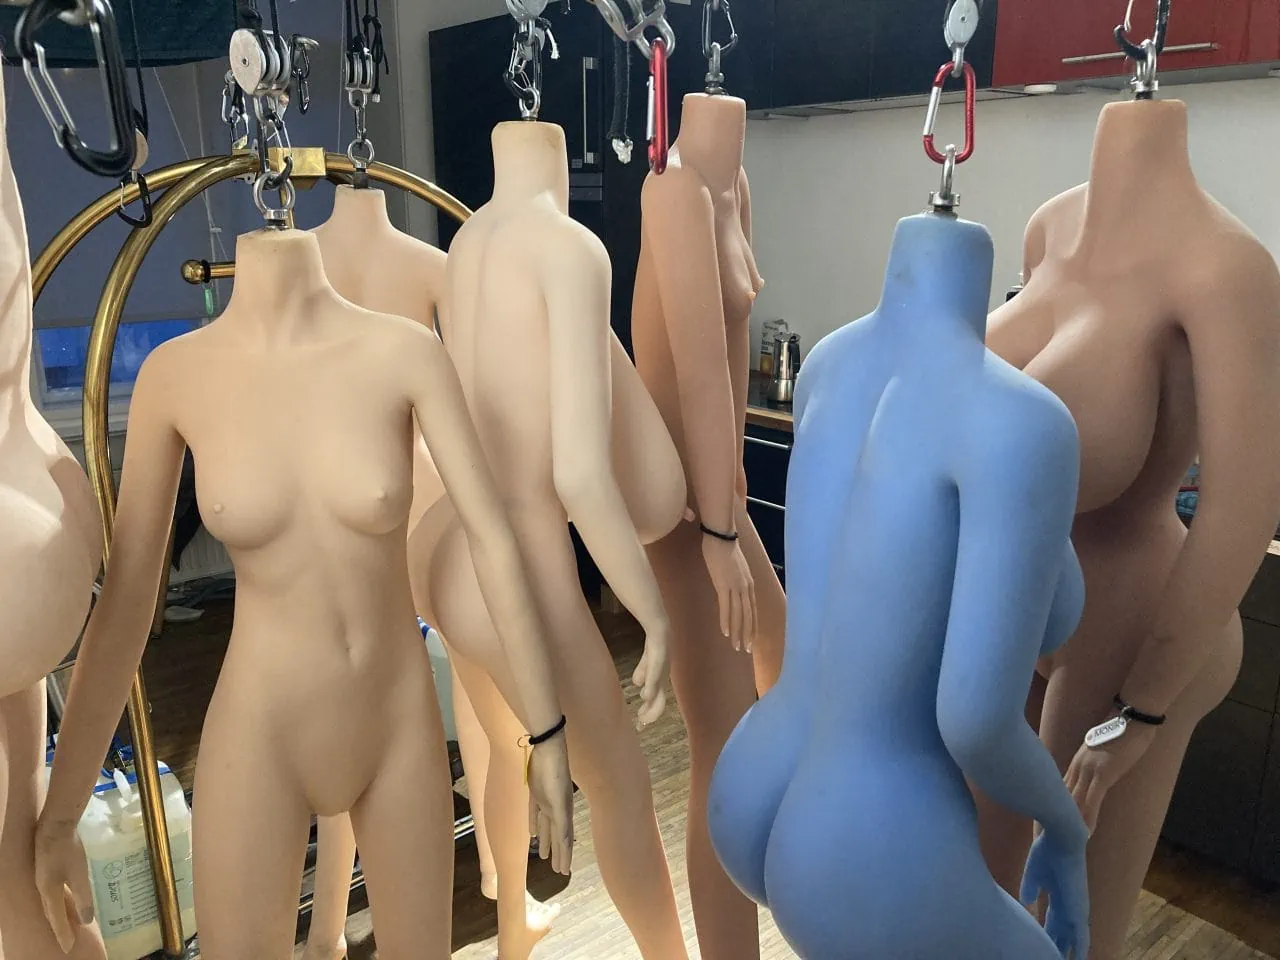 Mannequins hanging in a blue room with cyberbrothel vibes.